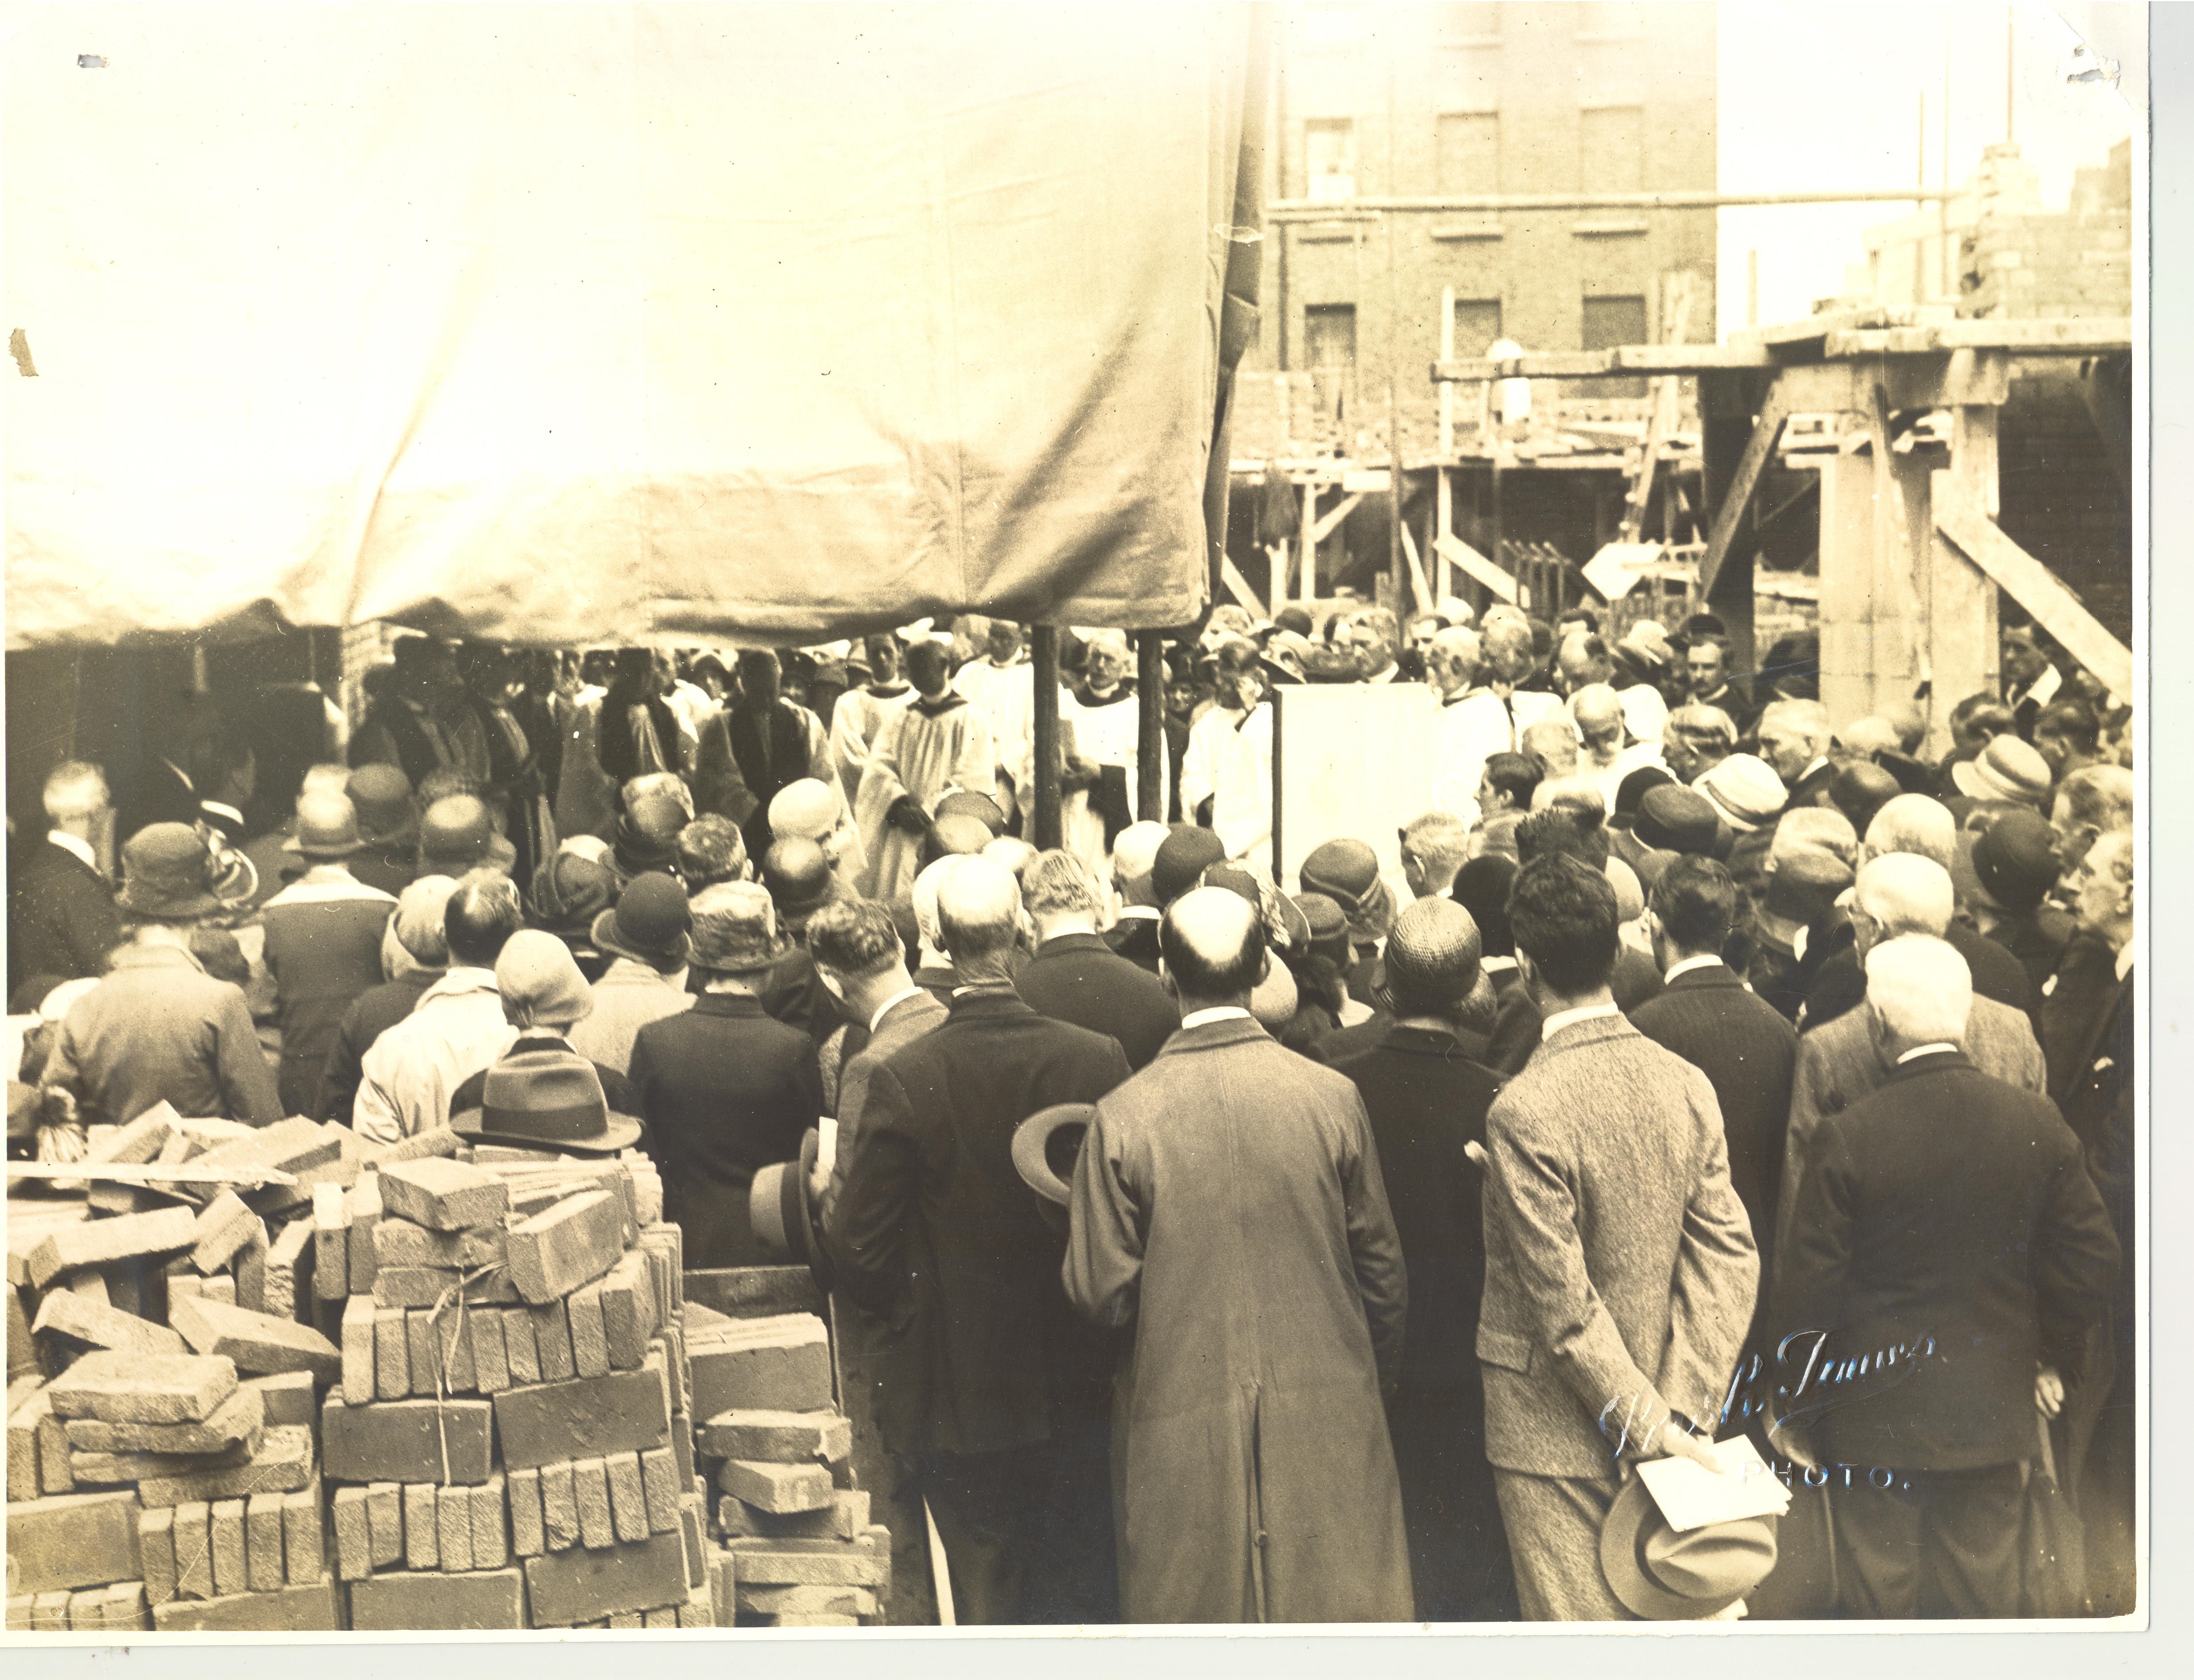 An evocative photograph taken during the laying of the foundation stone on 28 June, 1930, showing a crowd of people attempting to catch a glimpse of the Archbishop. RCB Library P.80.29.2